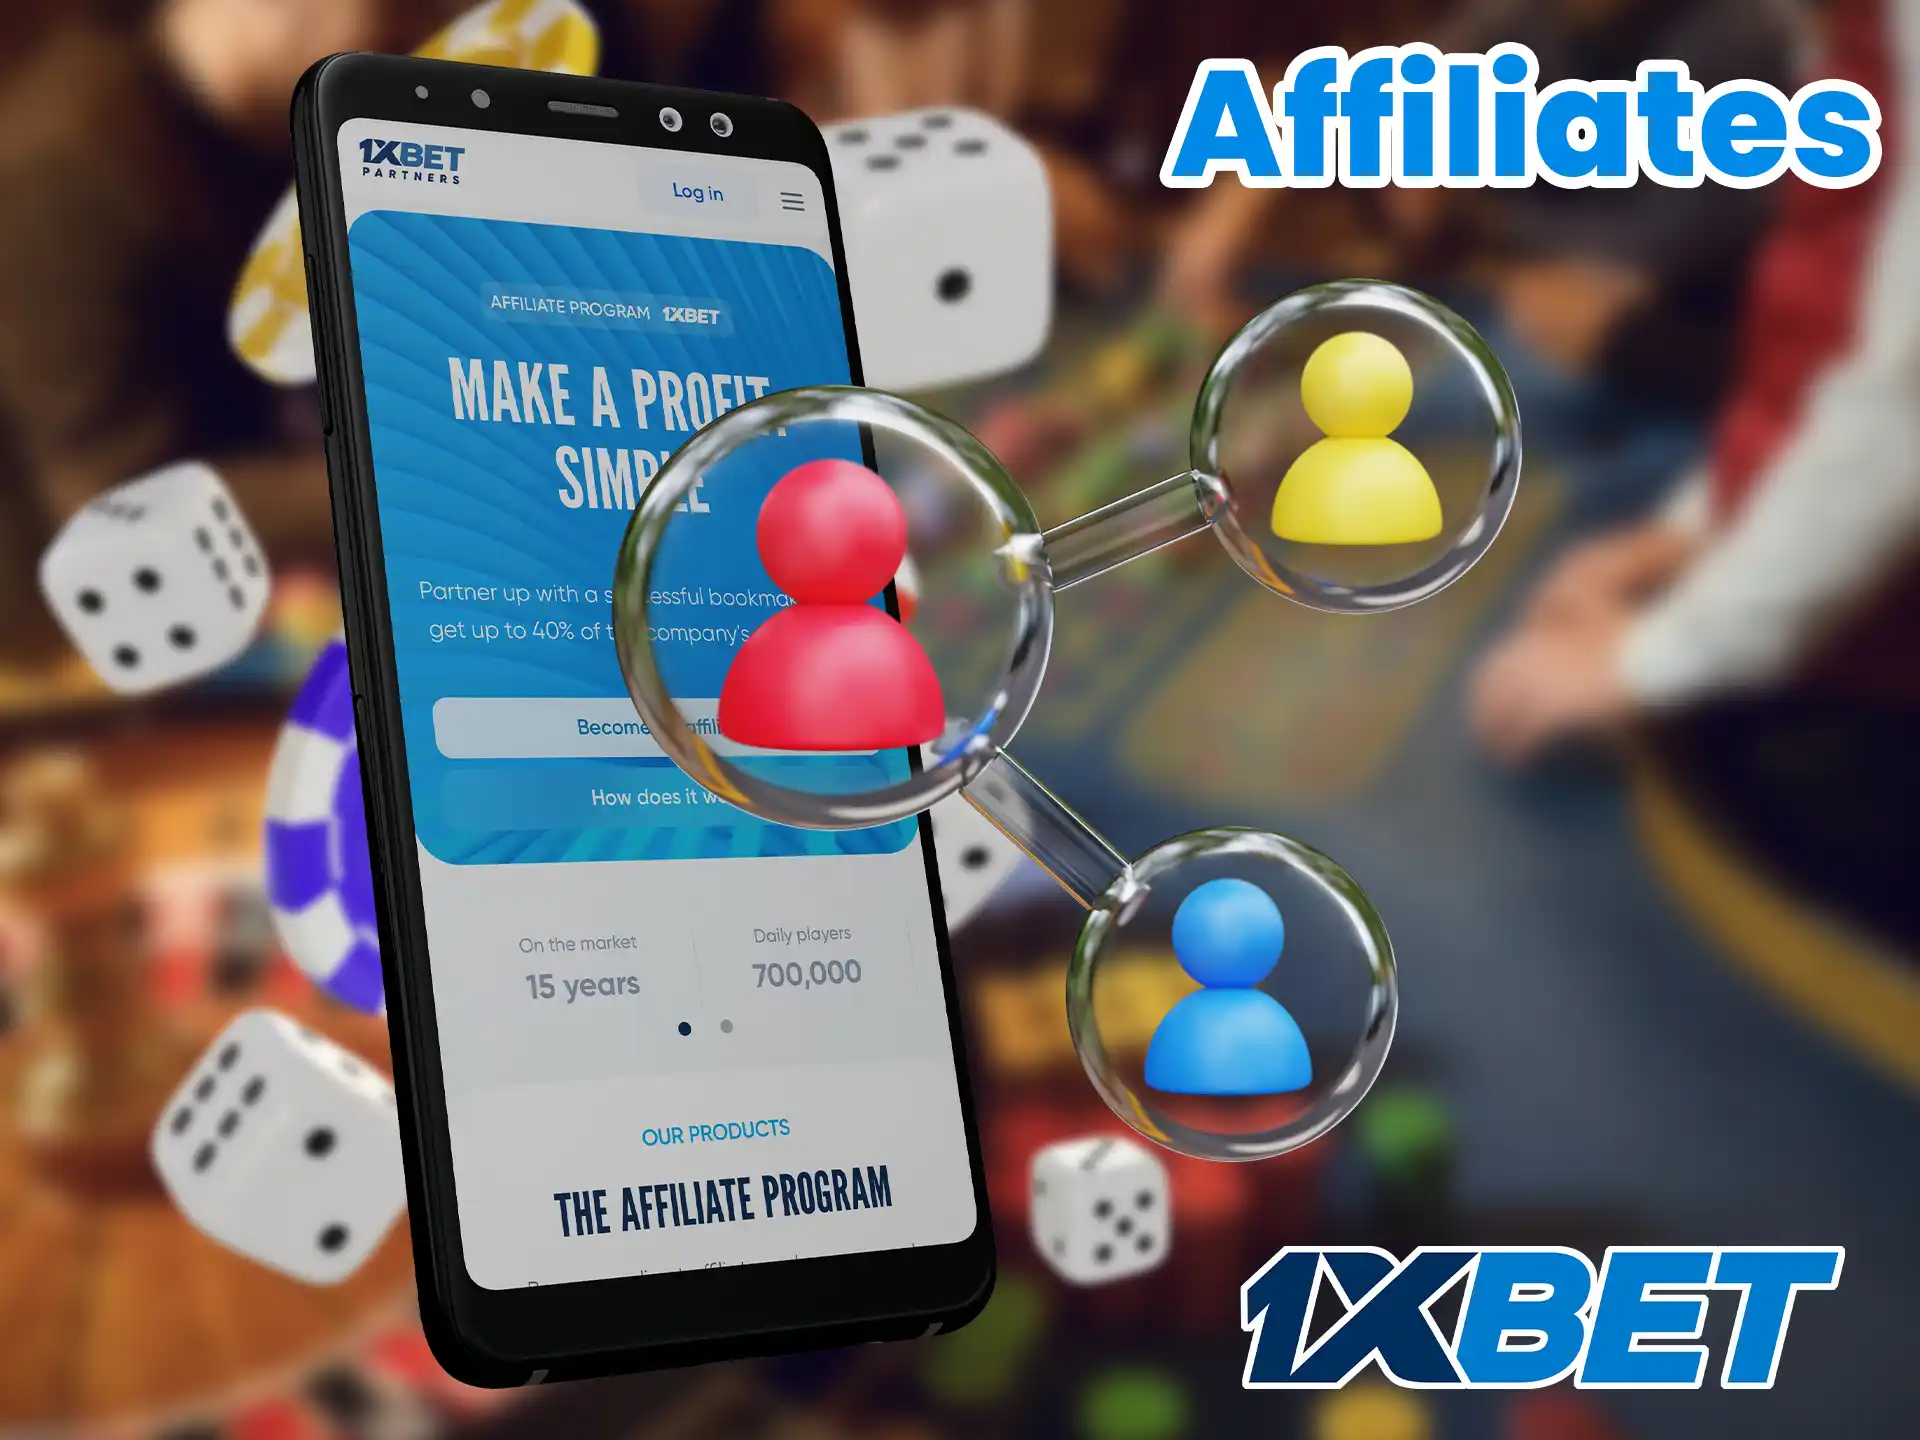 Become a 1xbet affiliate and get commission for referred customers.